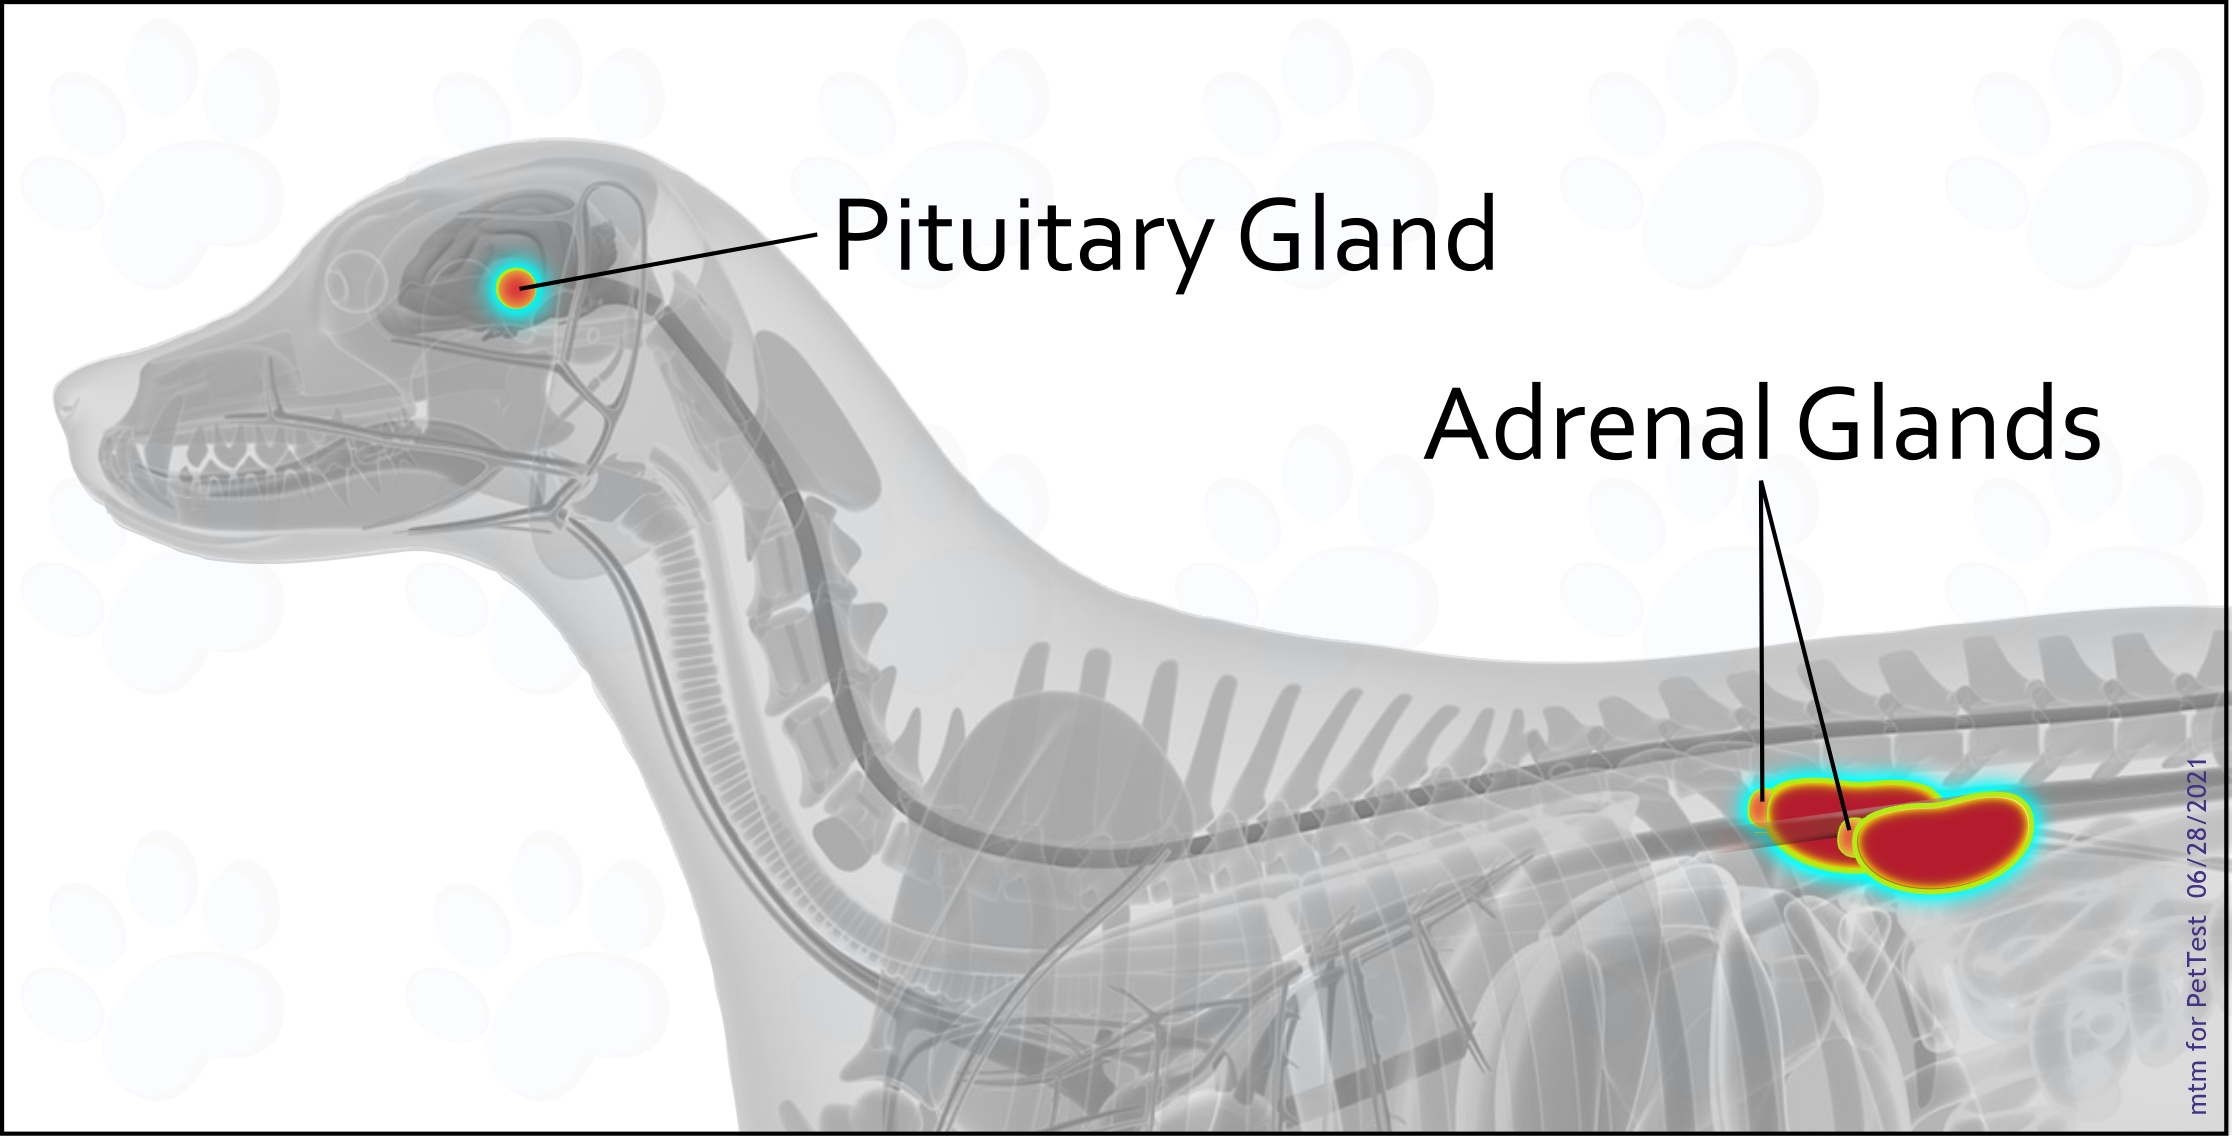 Location of the Pituitary Gland and Adrenal Glands for PT